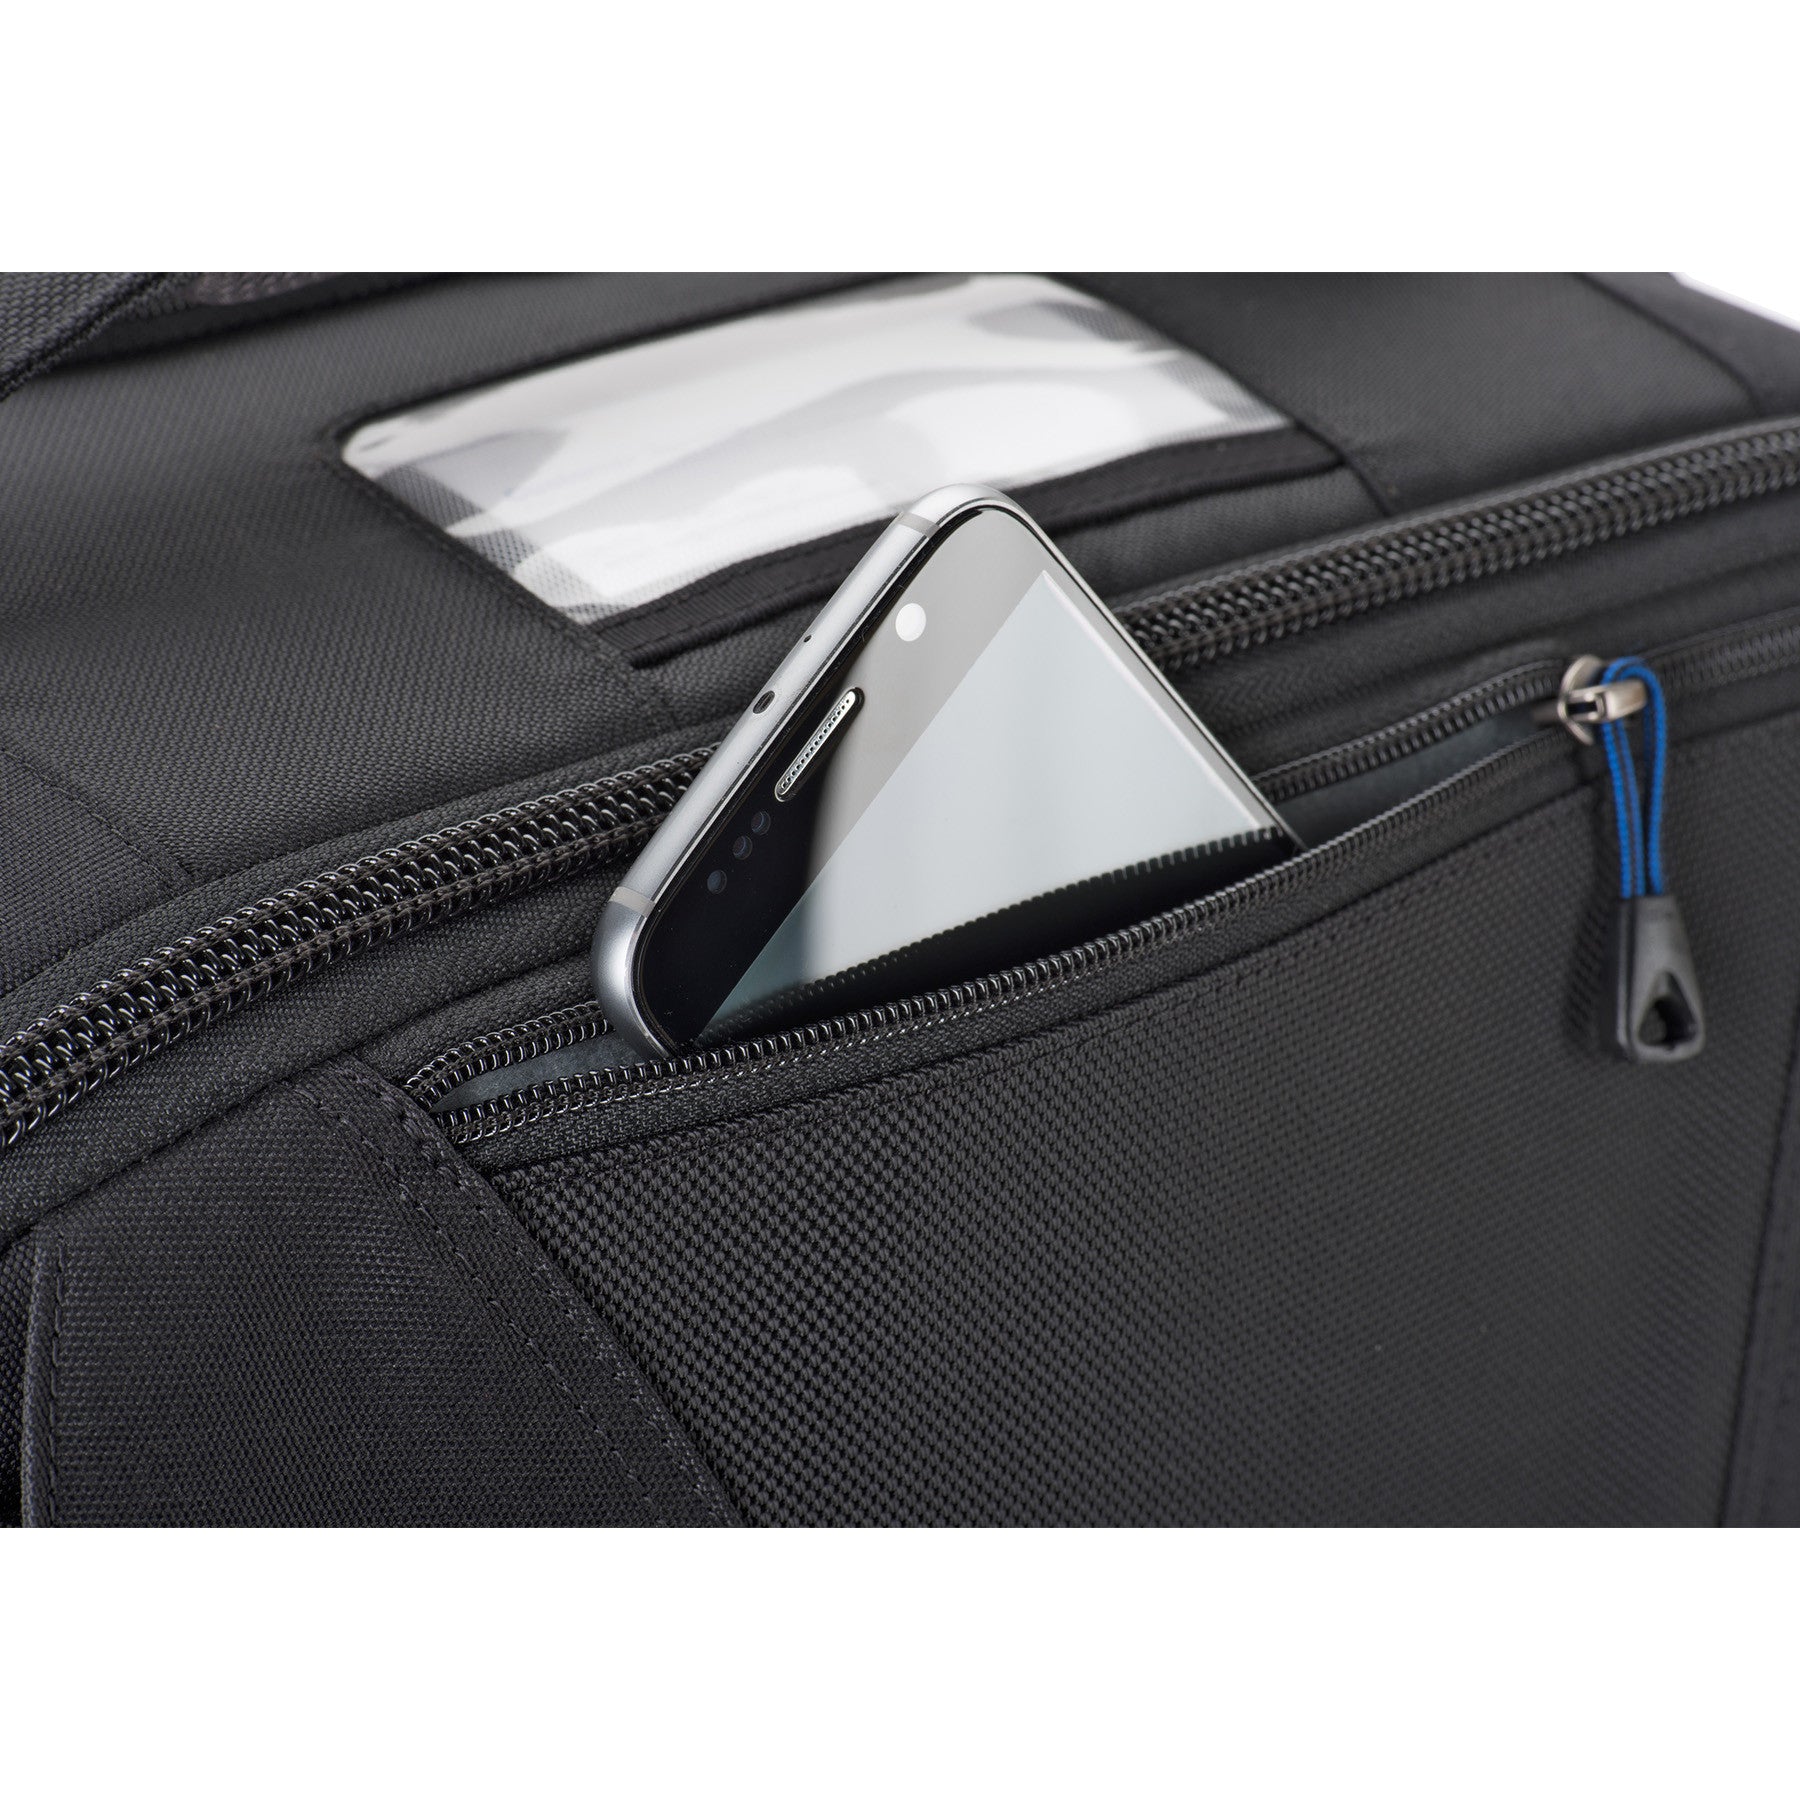 Dedicated, plush lined pocket on the front flap for smartphone or sunglasses